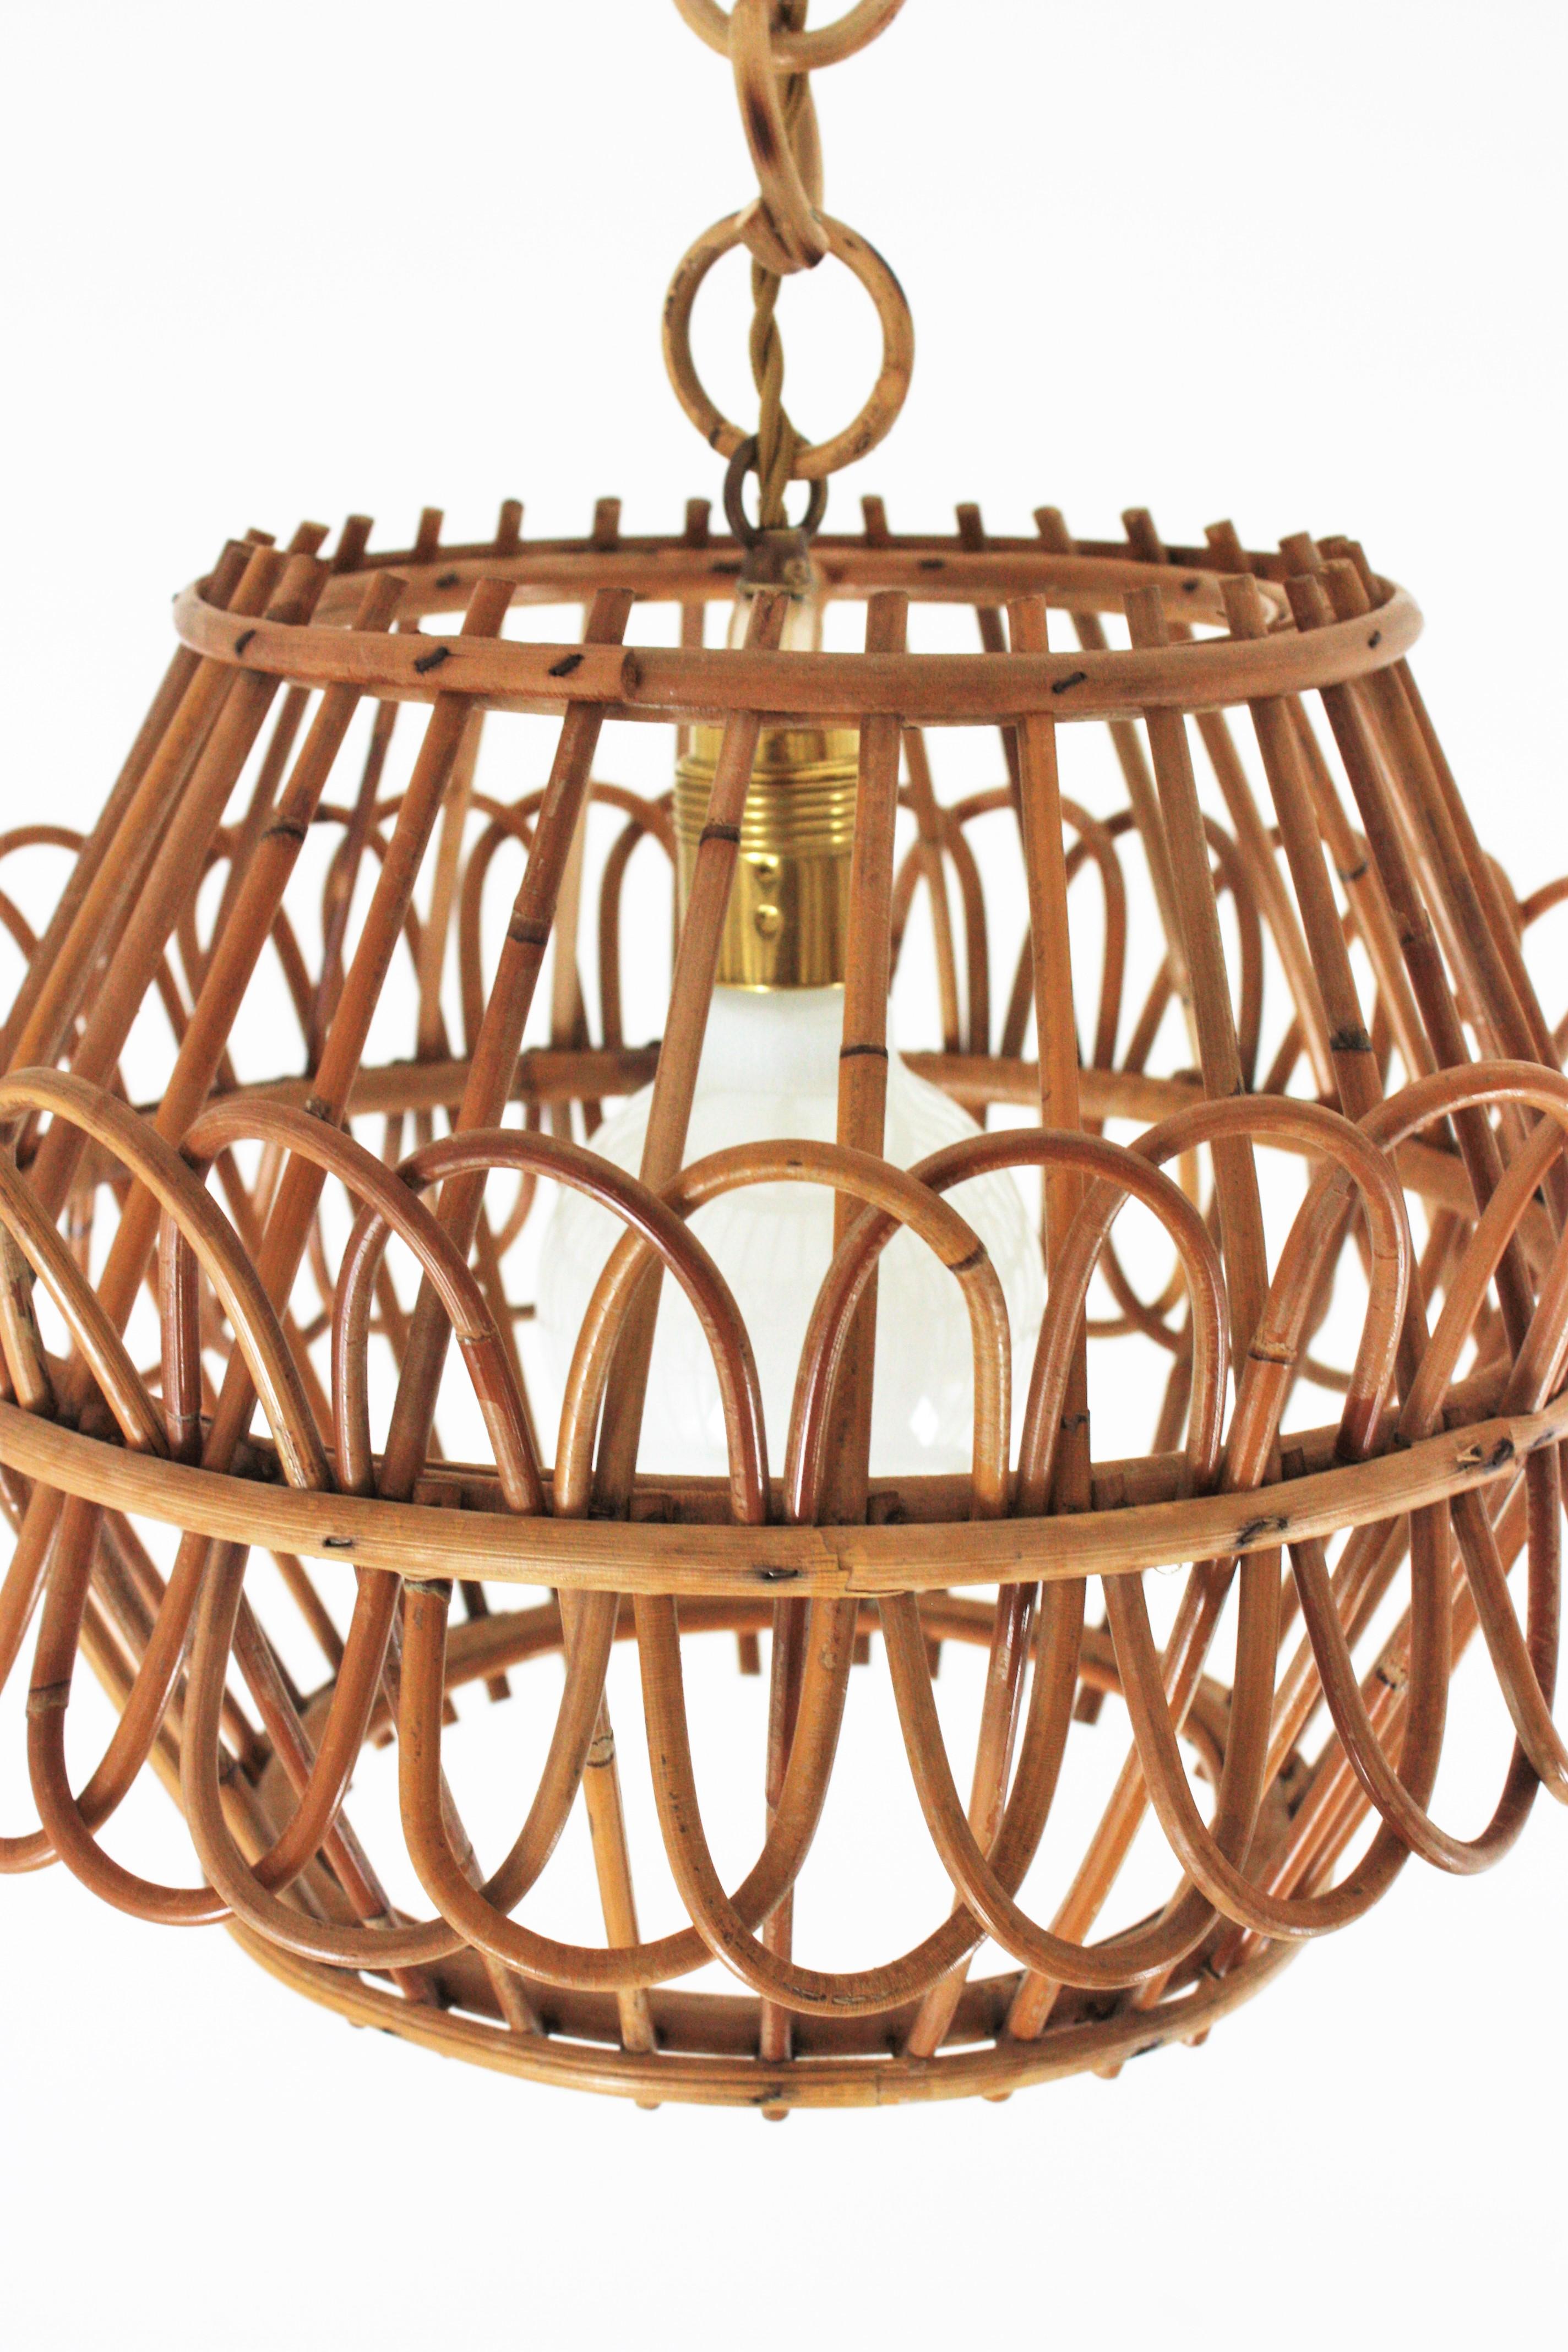 French Pendant Light or Lantern in Rattan, 1950s For Sale 6